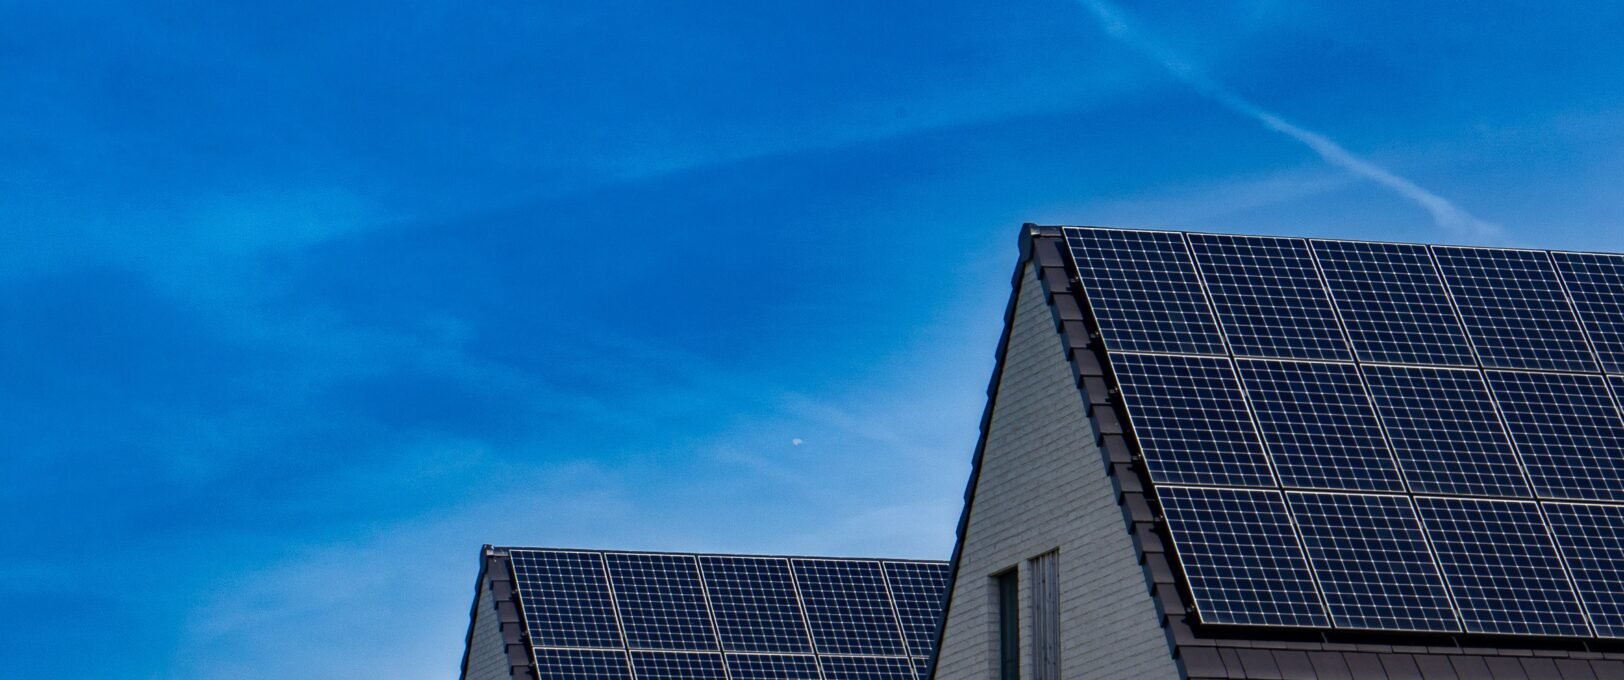 A row of houses with solar PV panels installed on the roofs.